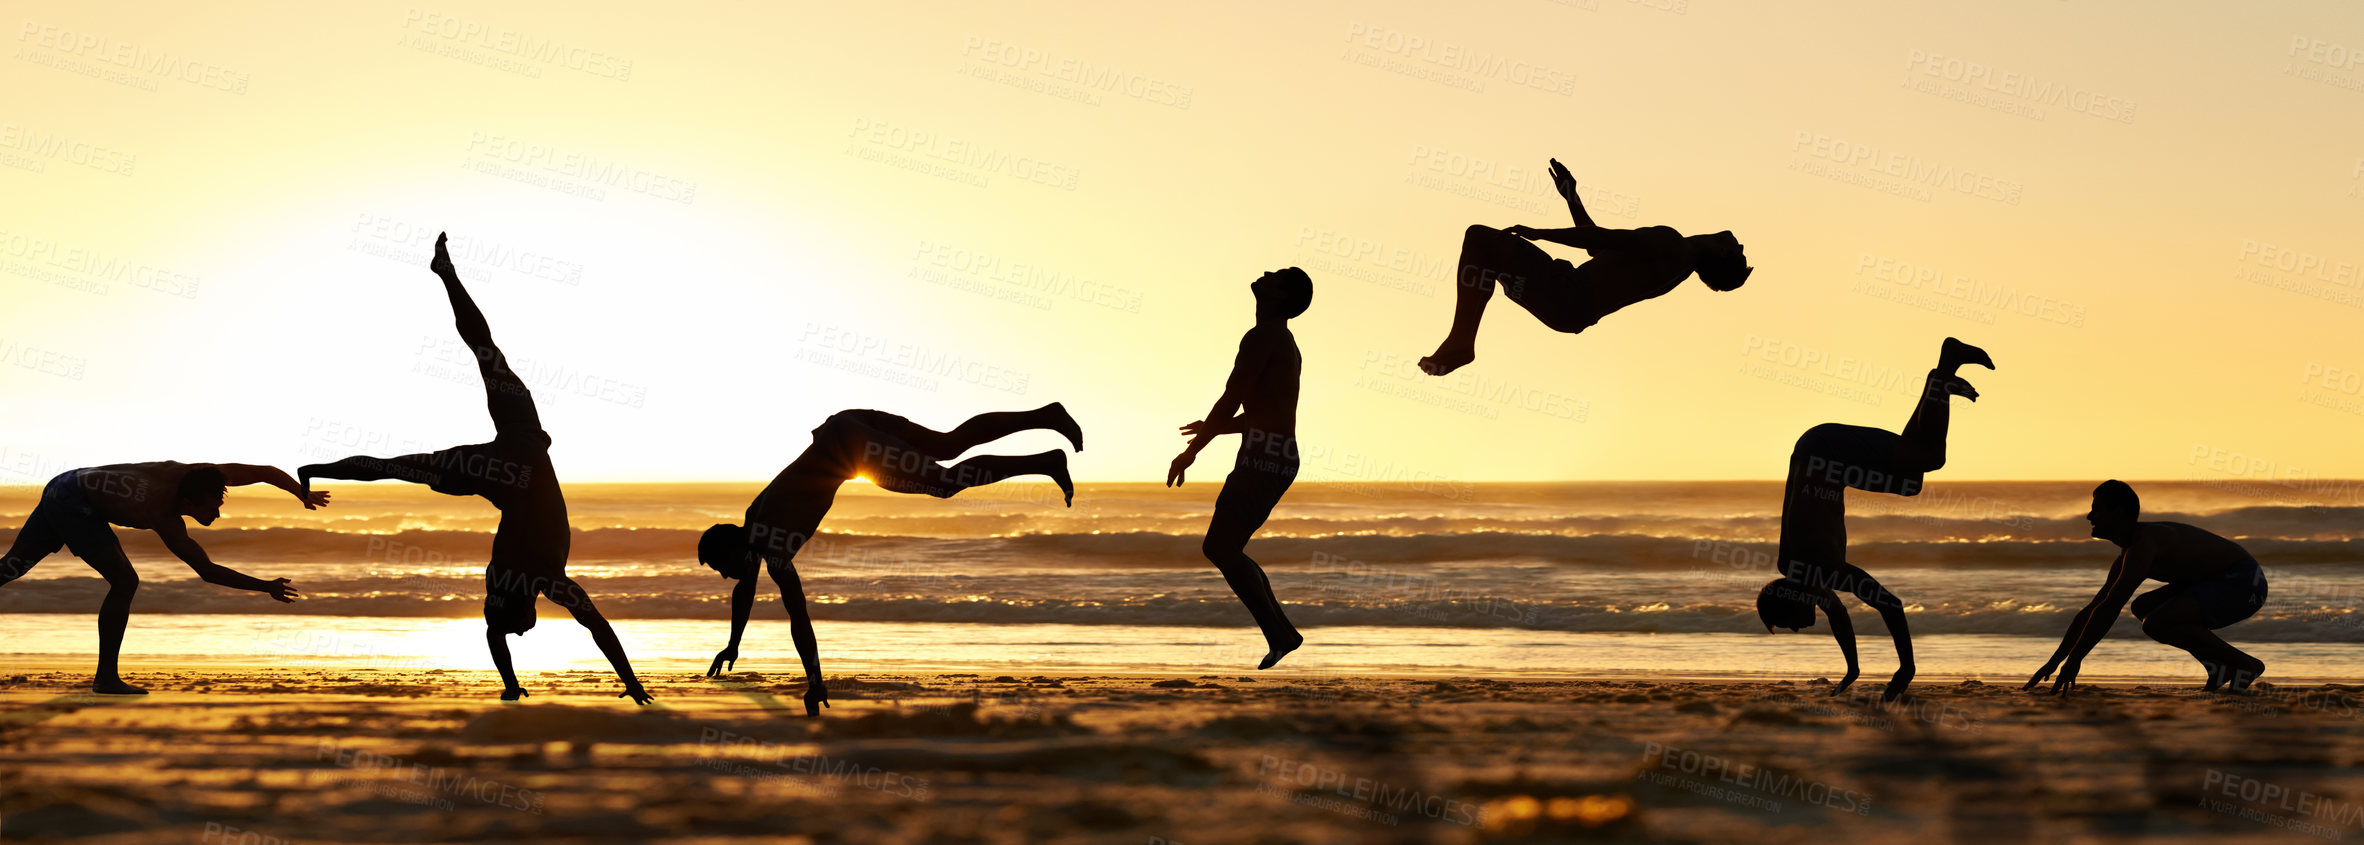 Buy stock photo Multi shot of a man doing flips on the beach front 